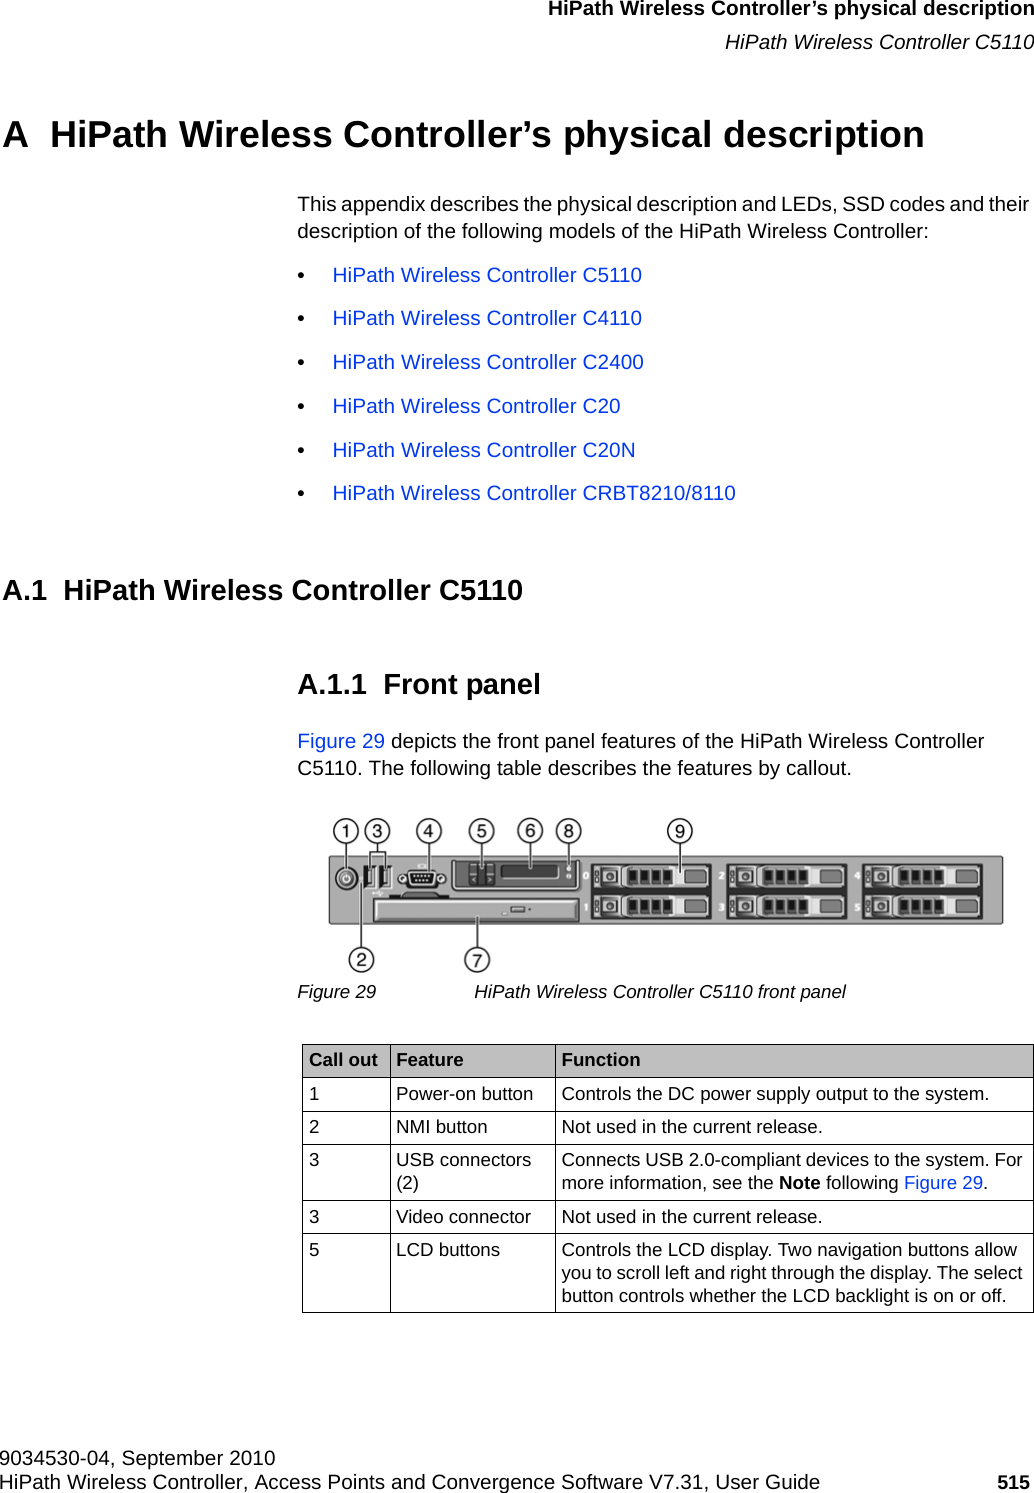 hwc_appendixa.fm9034530-04, September 2010HiPath Wireless Controller, Access Points and Convergence Software V7.31, User Guide 515      HiPath Wireless Controller’s physical descriptionHiPath Wireless Controller C5110A  HiPath Wireless Controller’s physical descriptionThis appendix describes the physical description and LEDs, SSD codes and their description of the following models of the HiPath Wireless Controller:•HiPath Wireless Controller C5110•HiPath Wireless Controller C4110•HiPath Wireless Controller C2400•HiPath Wireless Controller C20•HiPath Wireless Controller C20N•HiPath Wireless Controller CRBT8210/8110A.1  HiPath Wireless Controller C5110 A.1.1  Front panelFigure 29 depicts the front panel features of the HiPath Wireless Controller C5110. The following table describes the features by callout.Figure 29 HiPath Wireless Controller C5110 front panelCall out Feature Function1 Power-on button Controls the DC power supply output to the system.2 NMI button Not used in the current release.3 USB connectors (2) Connects USB 2.0-compliant devices to the system. For more information, see the Note following Figure 29.3 Video connector Not used in the current release.5 LCD buttons Controls the LCD display. Two navigation buttons allow you to scroll left and right through the display. The select button controls whether the LCD backlight is on or off.